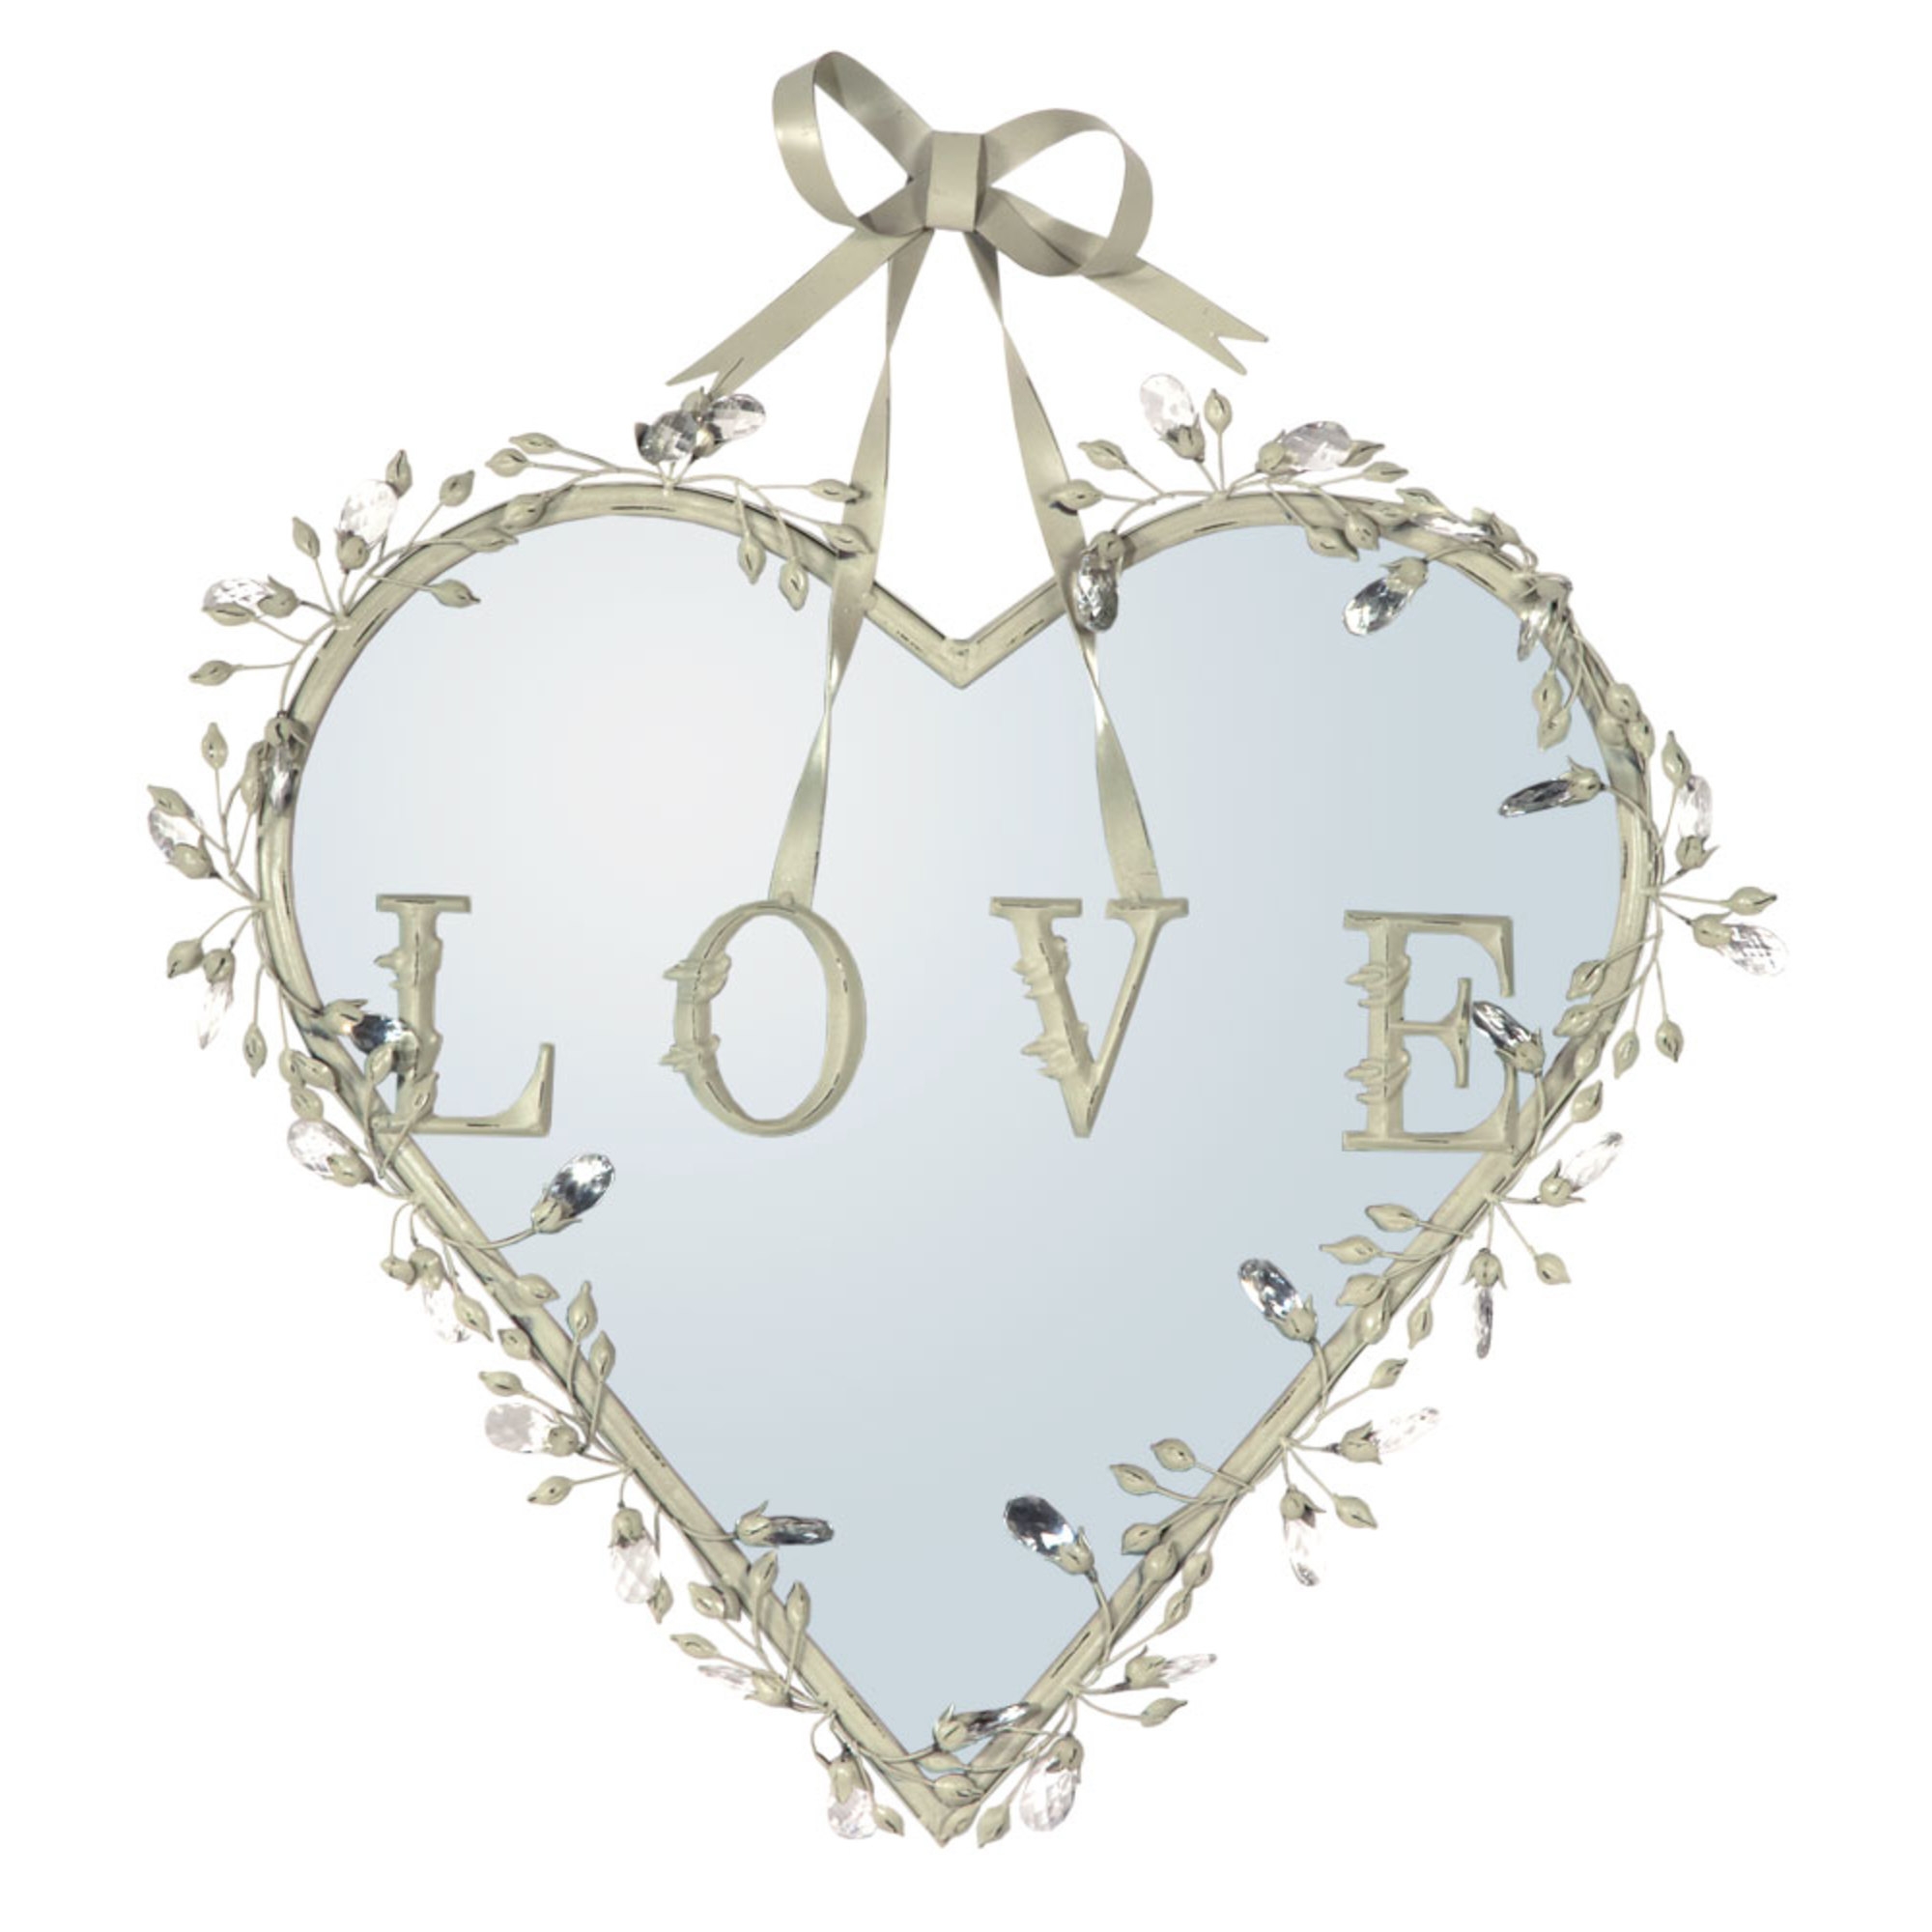 Heart Mirror with Crystals - Antique White